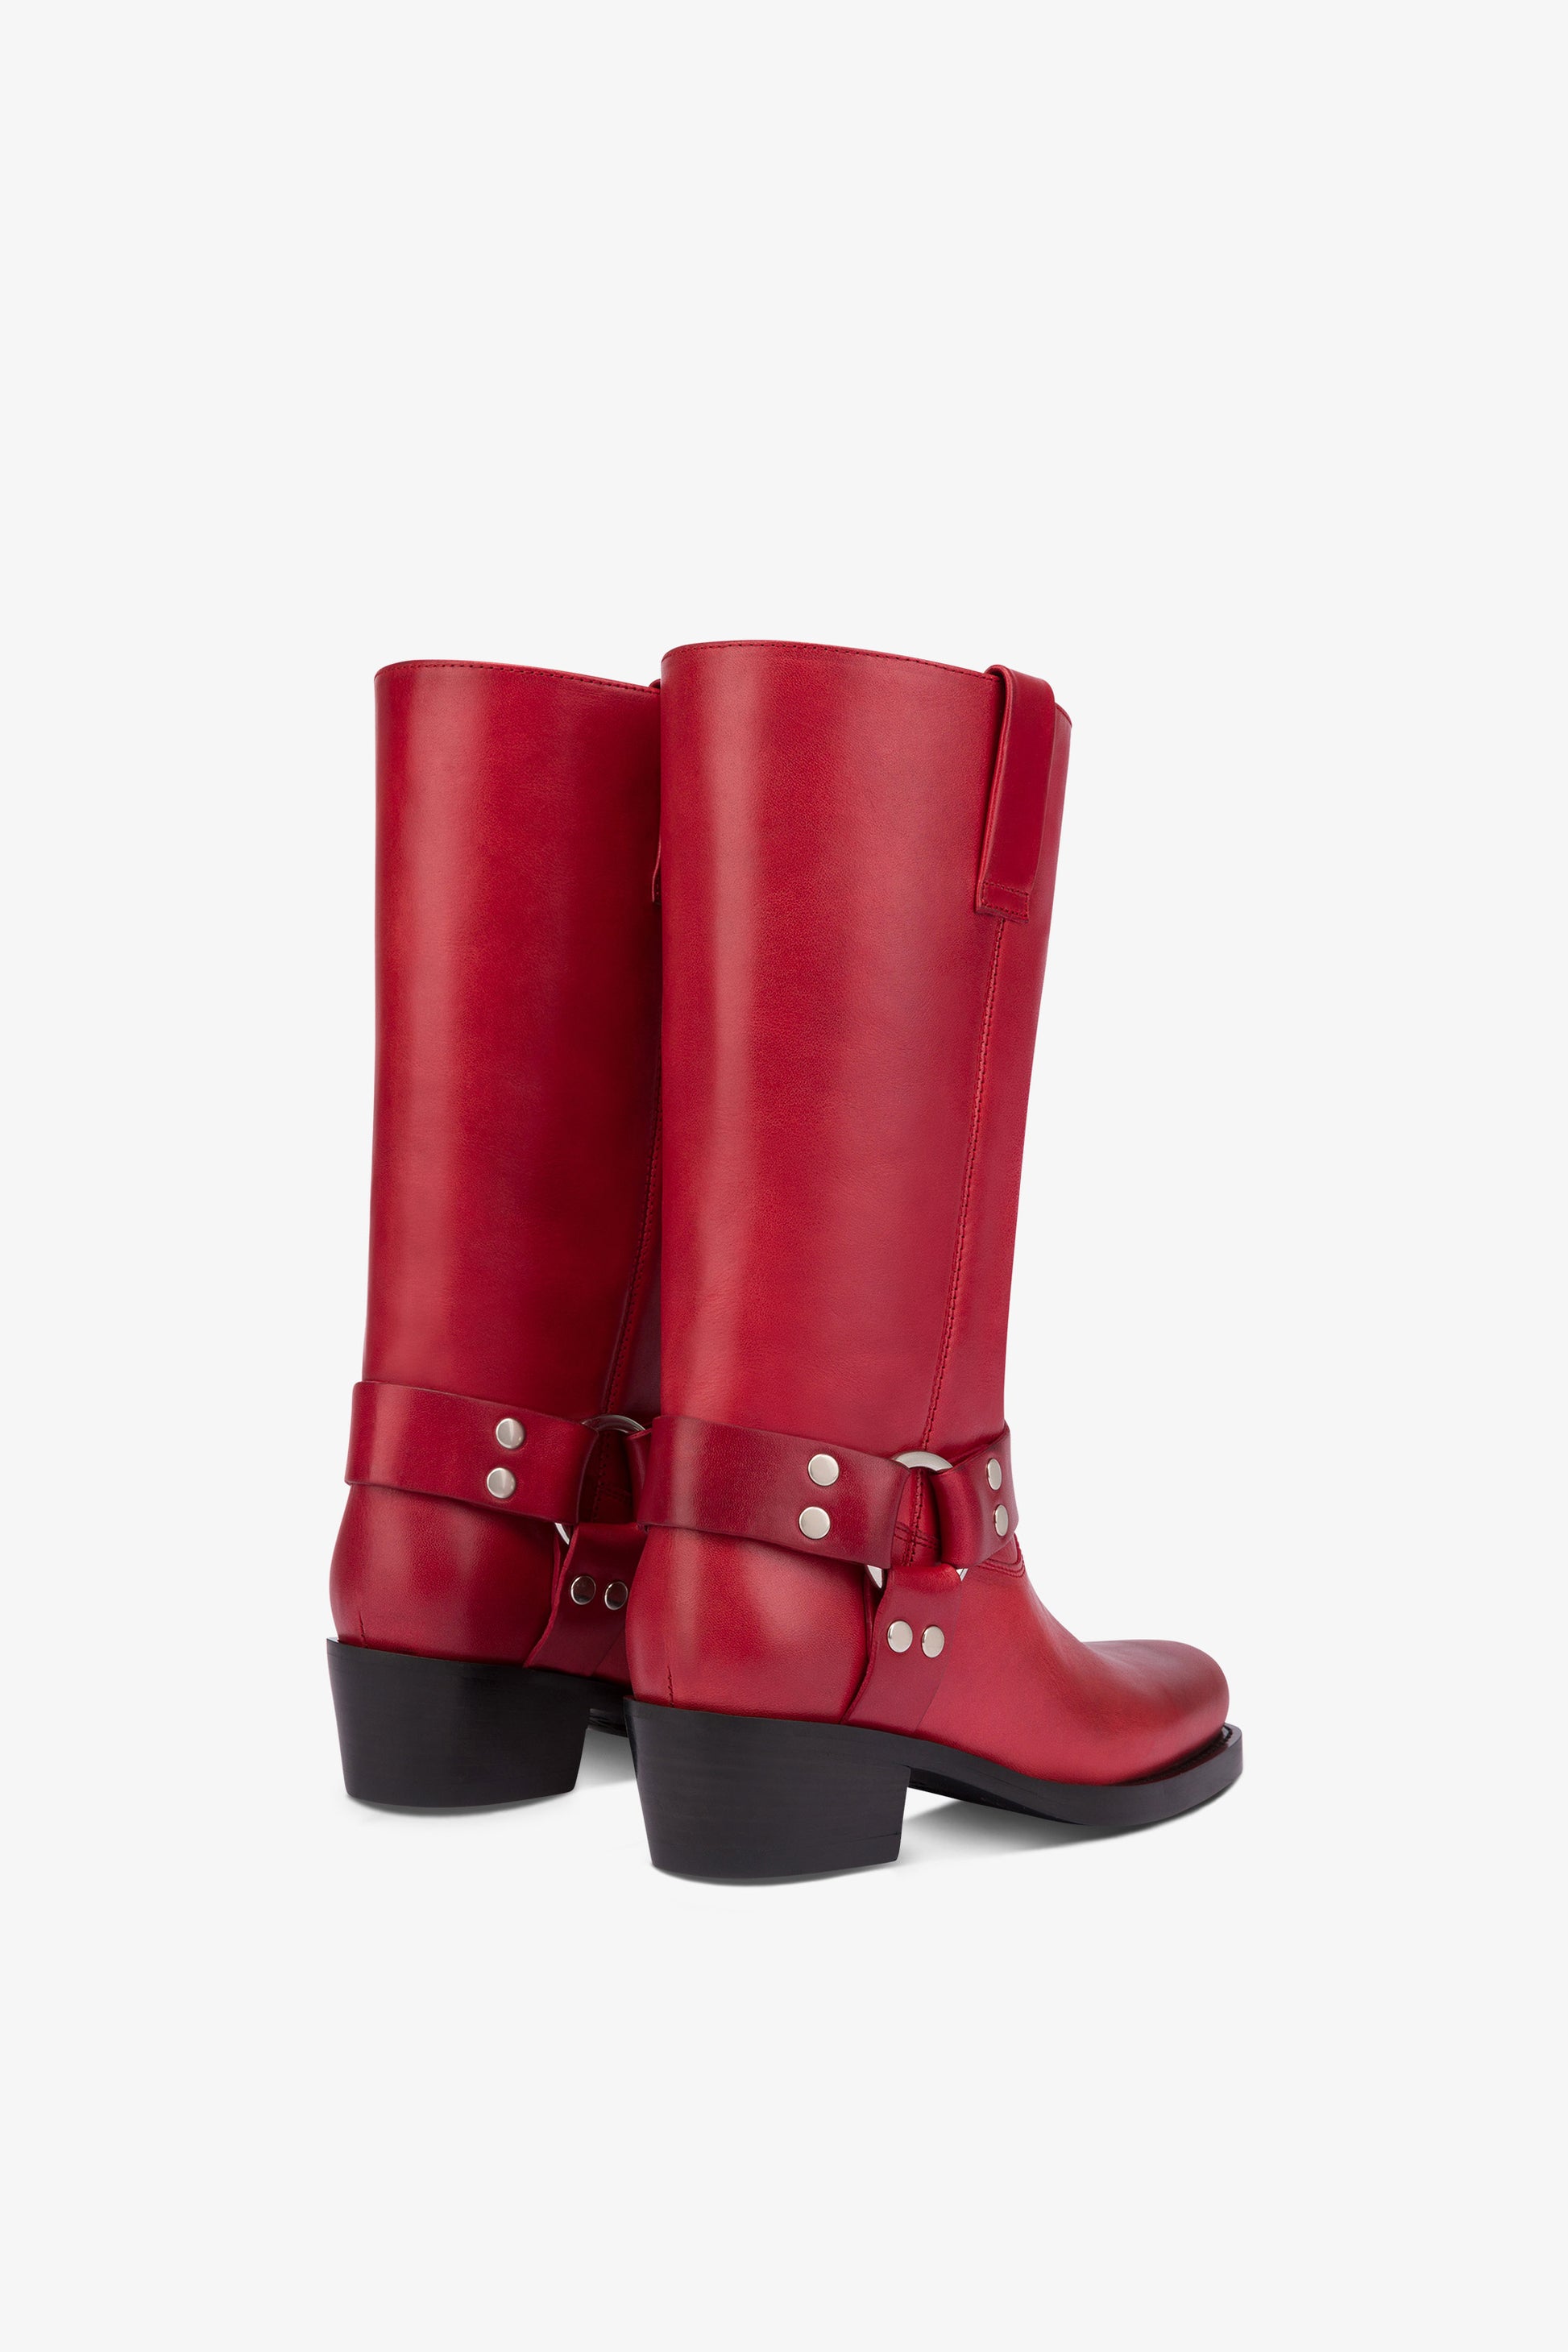 Square-toe boots in smooth fiesta leather